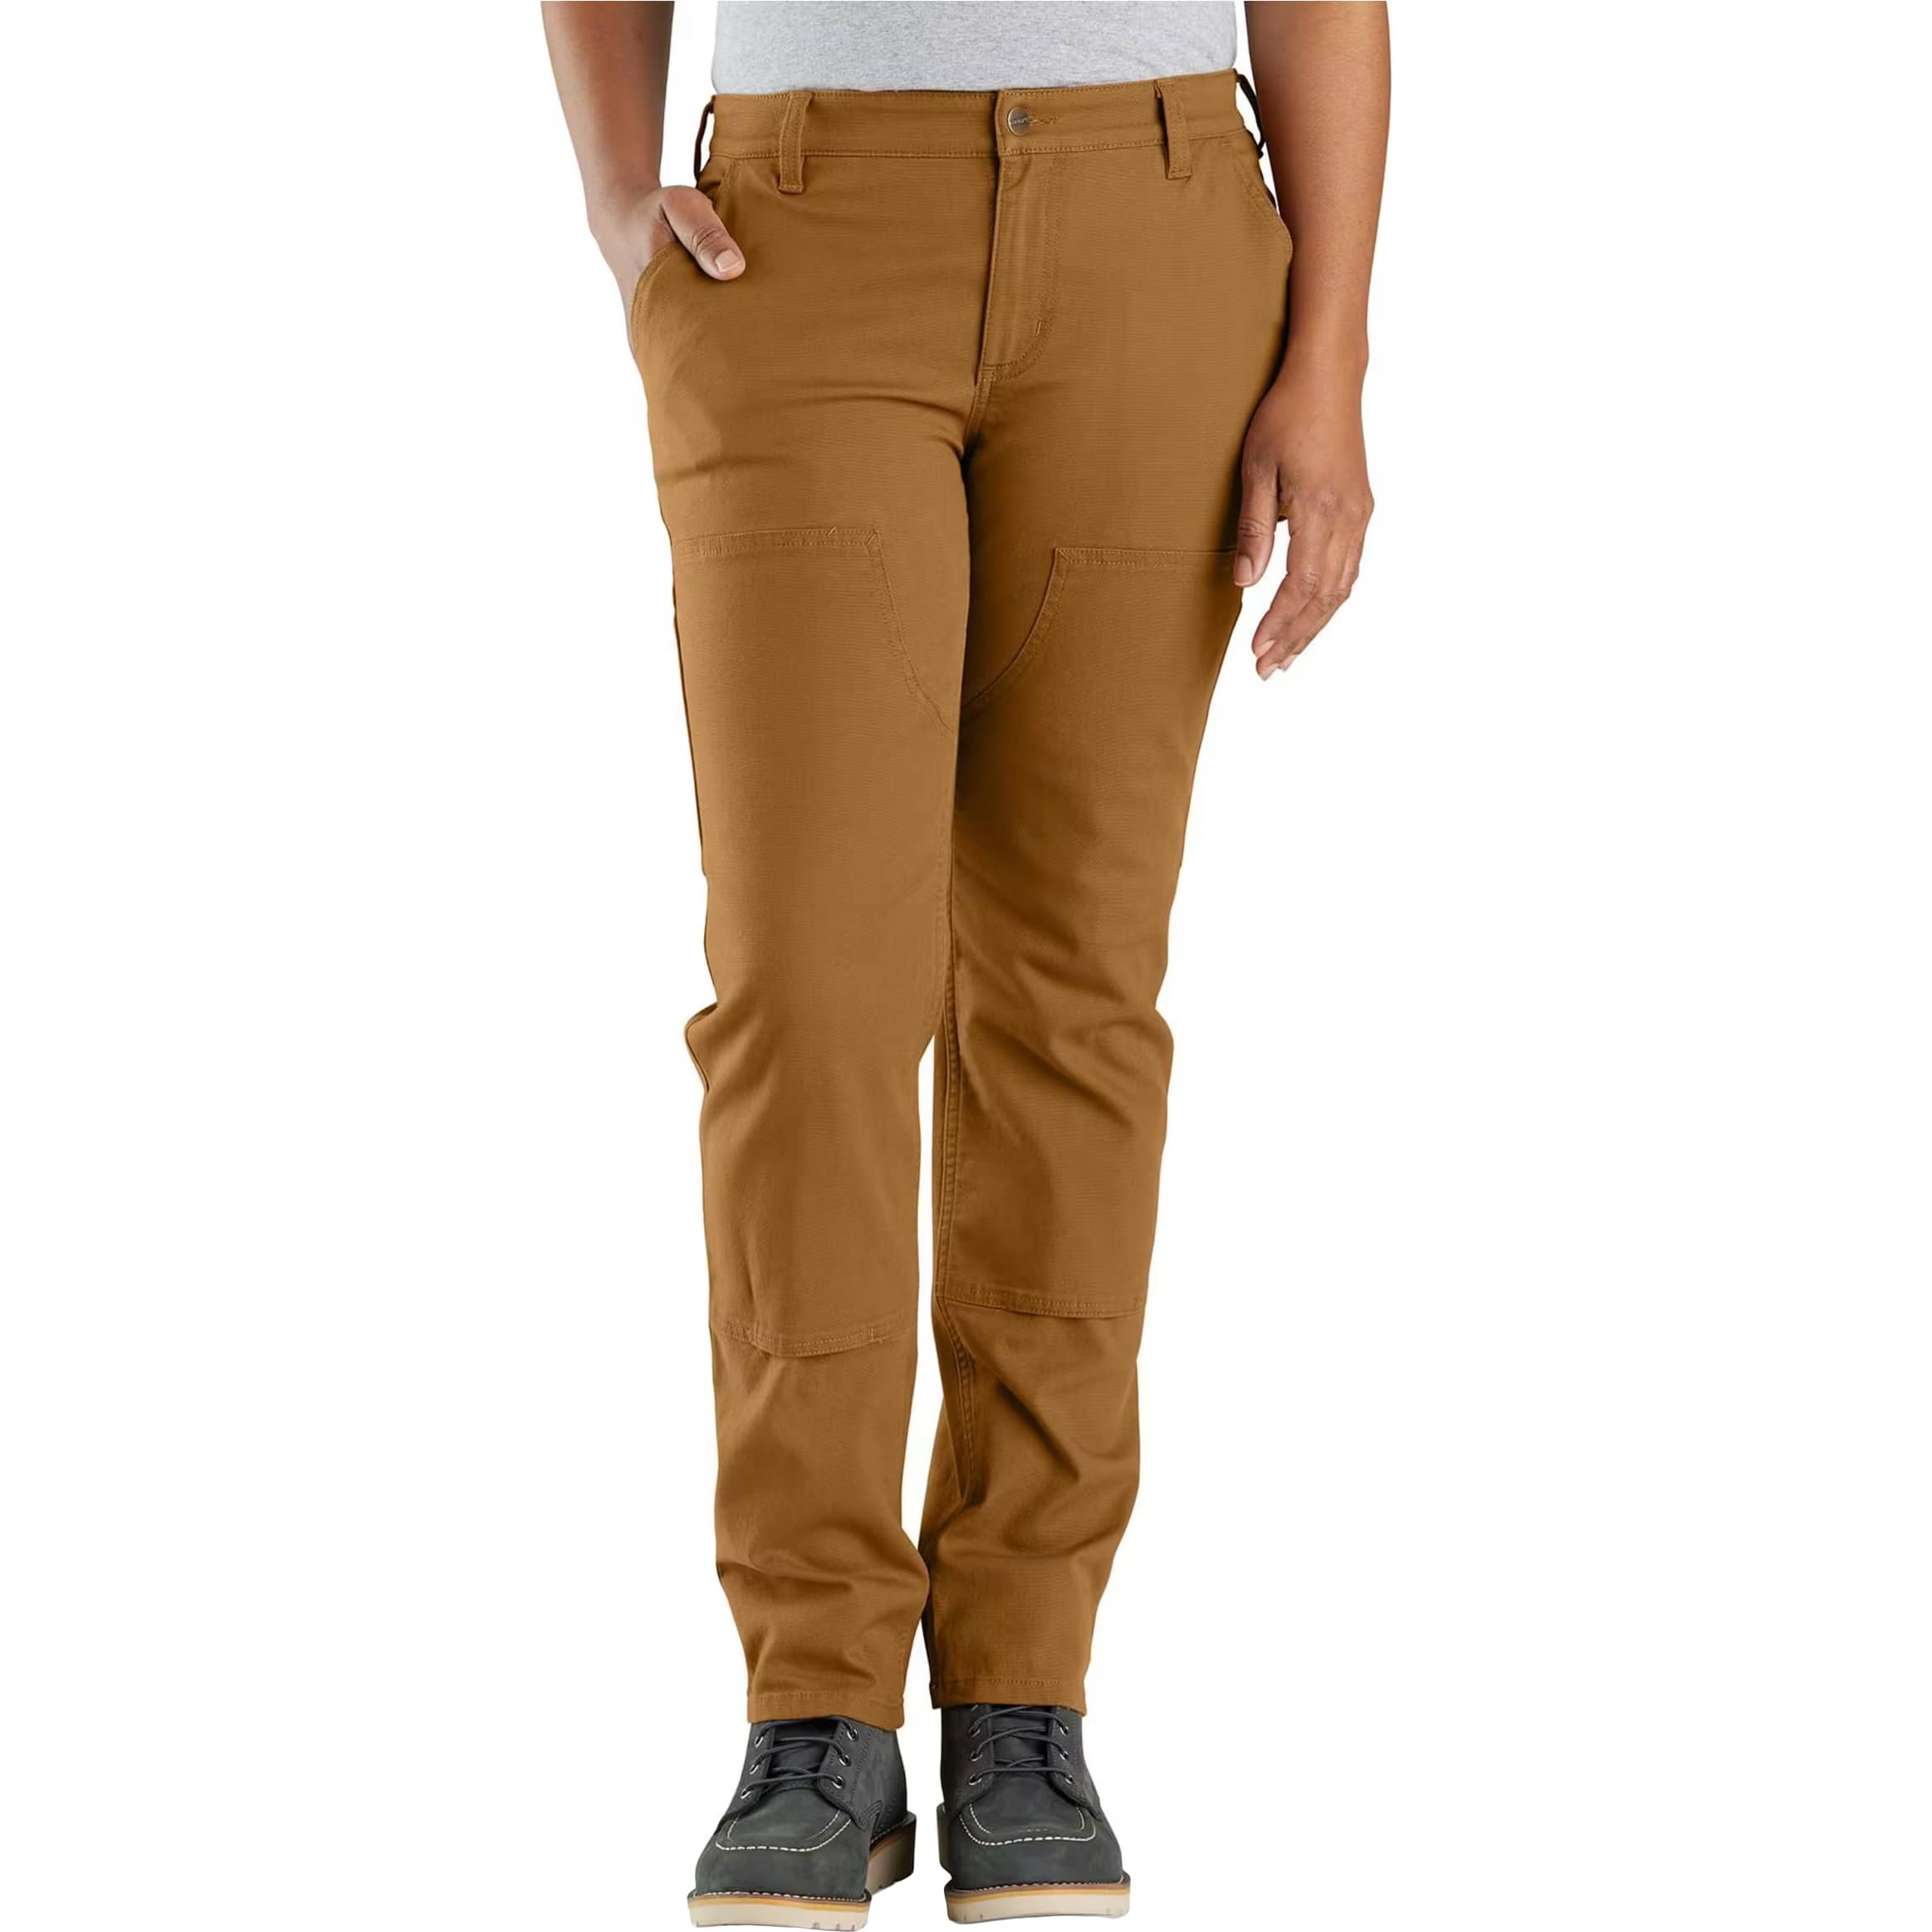 Carhartt Women's lined pants Size 12 - $41 - From Sandys